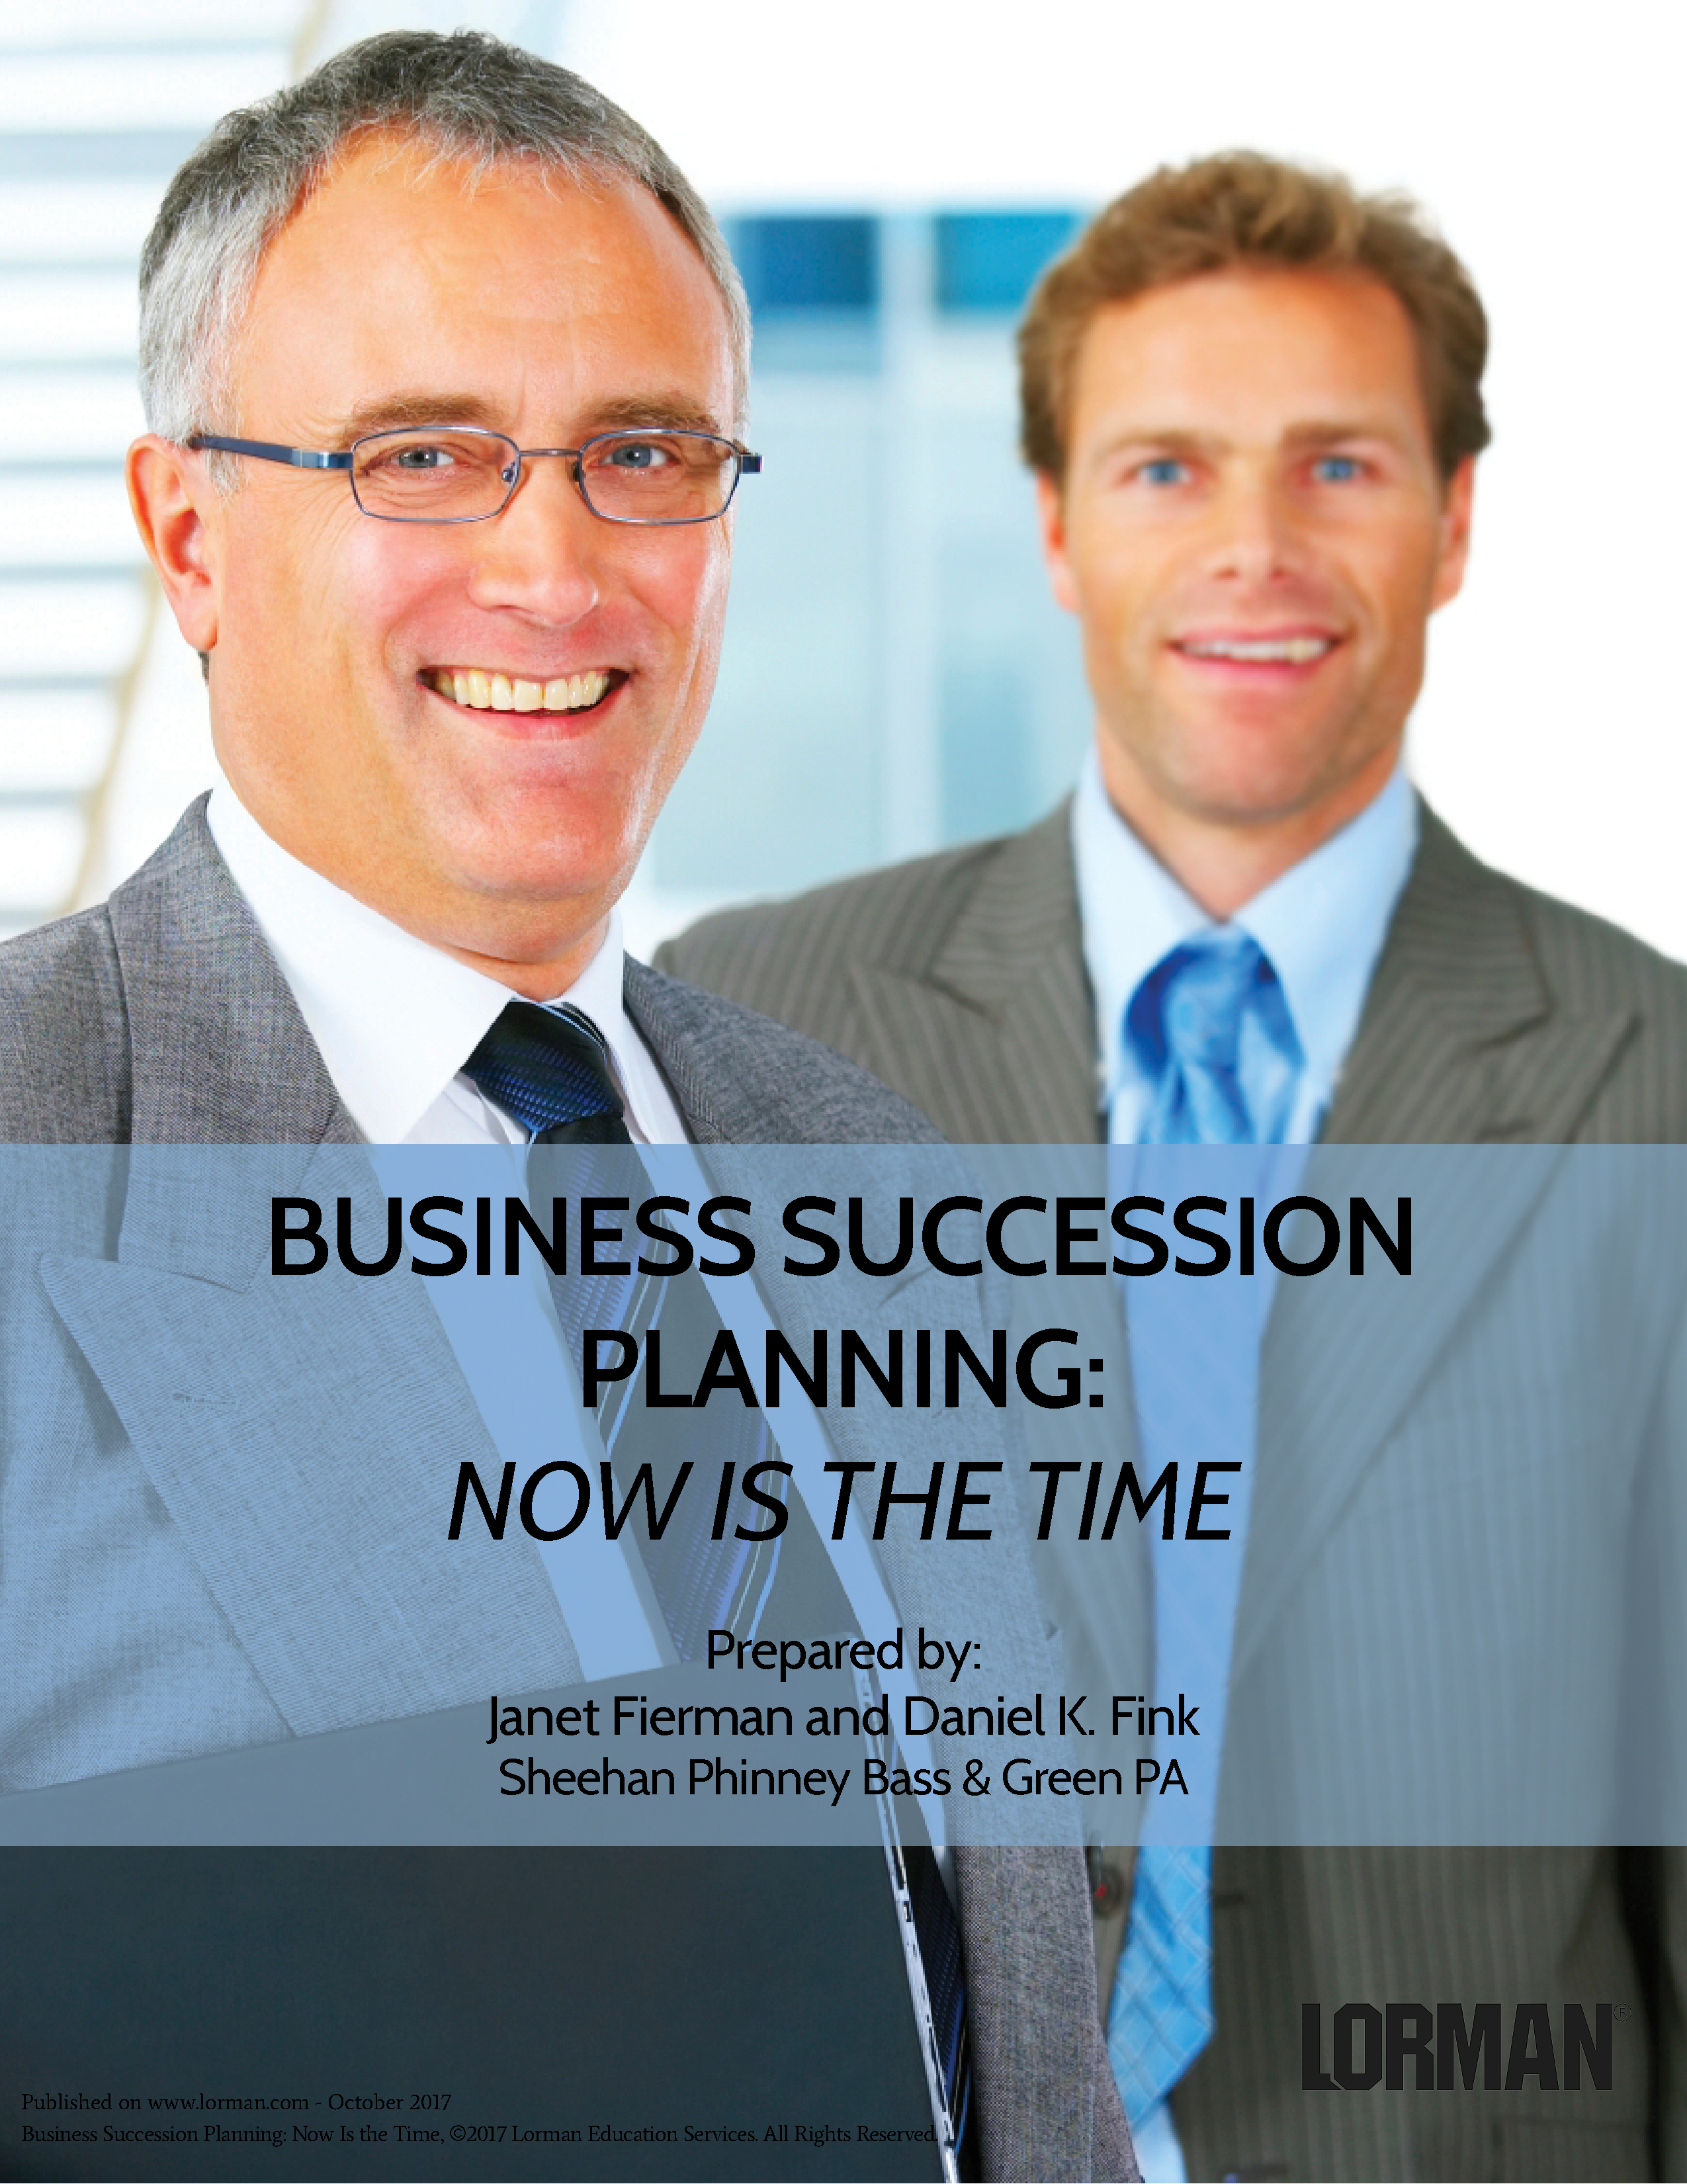 Business Succession Planning: Now Is the Time